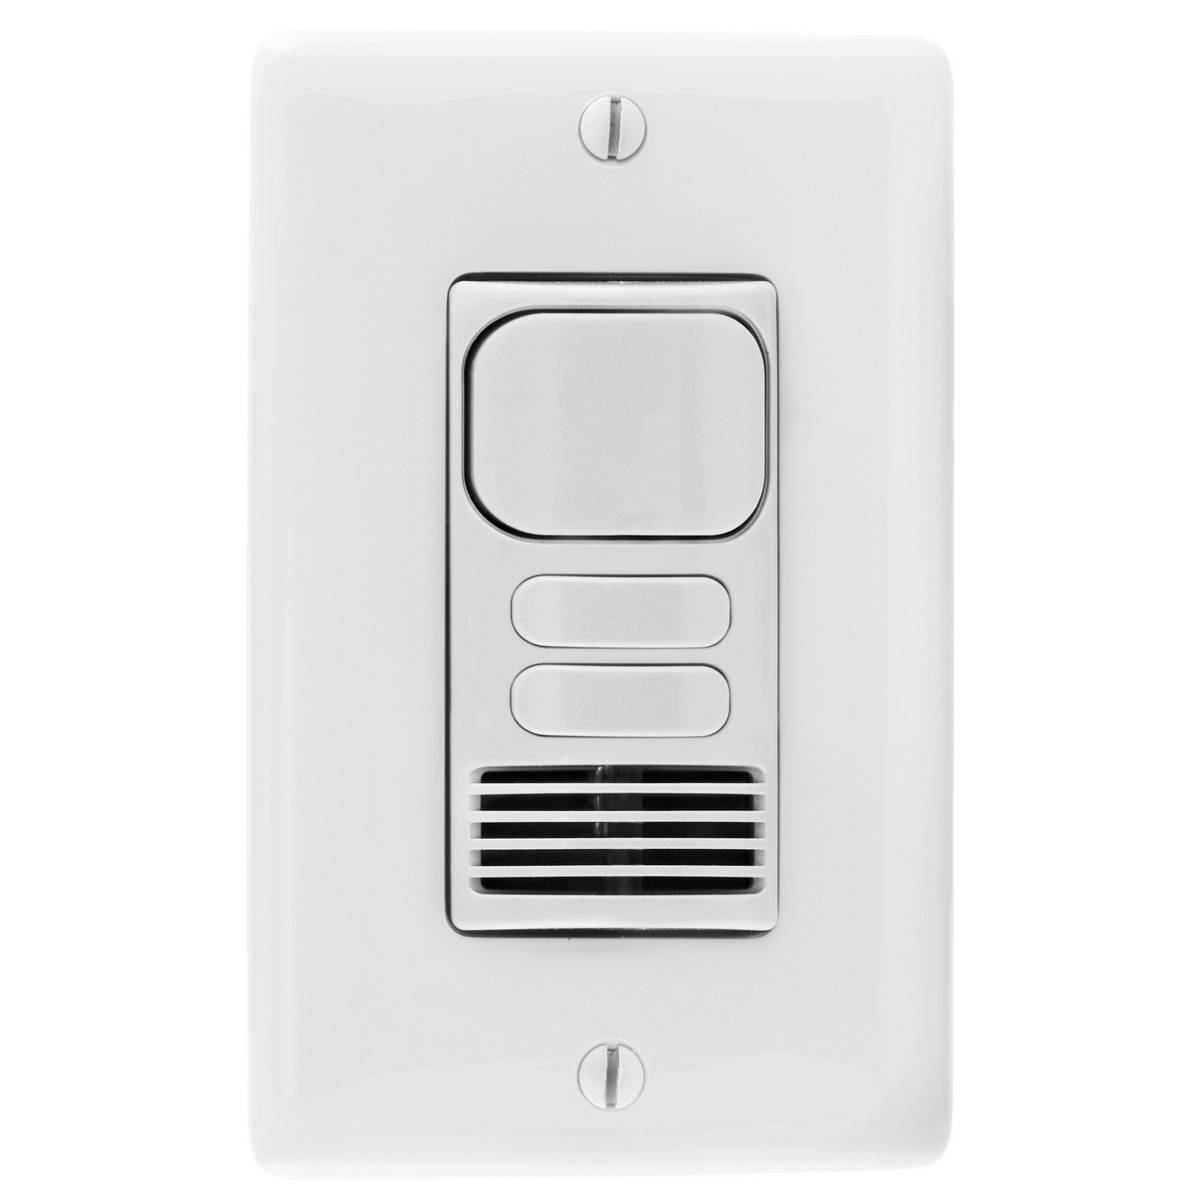 Wiring Device-Kellems H-MOSS® AD2000W22 2-Button 2-Circuit Adaptive Dual Technology Occupancy Sensor Switch, 120/277 VAC, Passive Infrared/Ultrasonic Sensor, 1000 sq-ft Coverage, Wall Mount